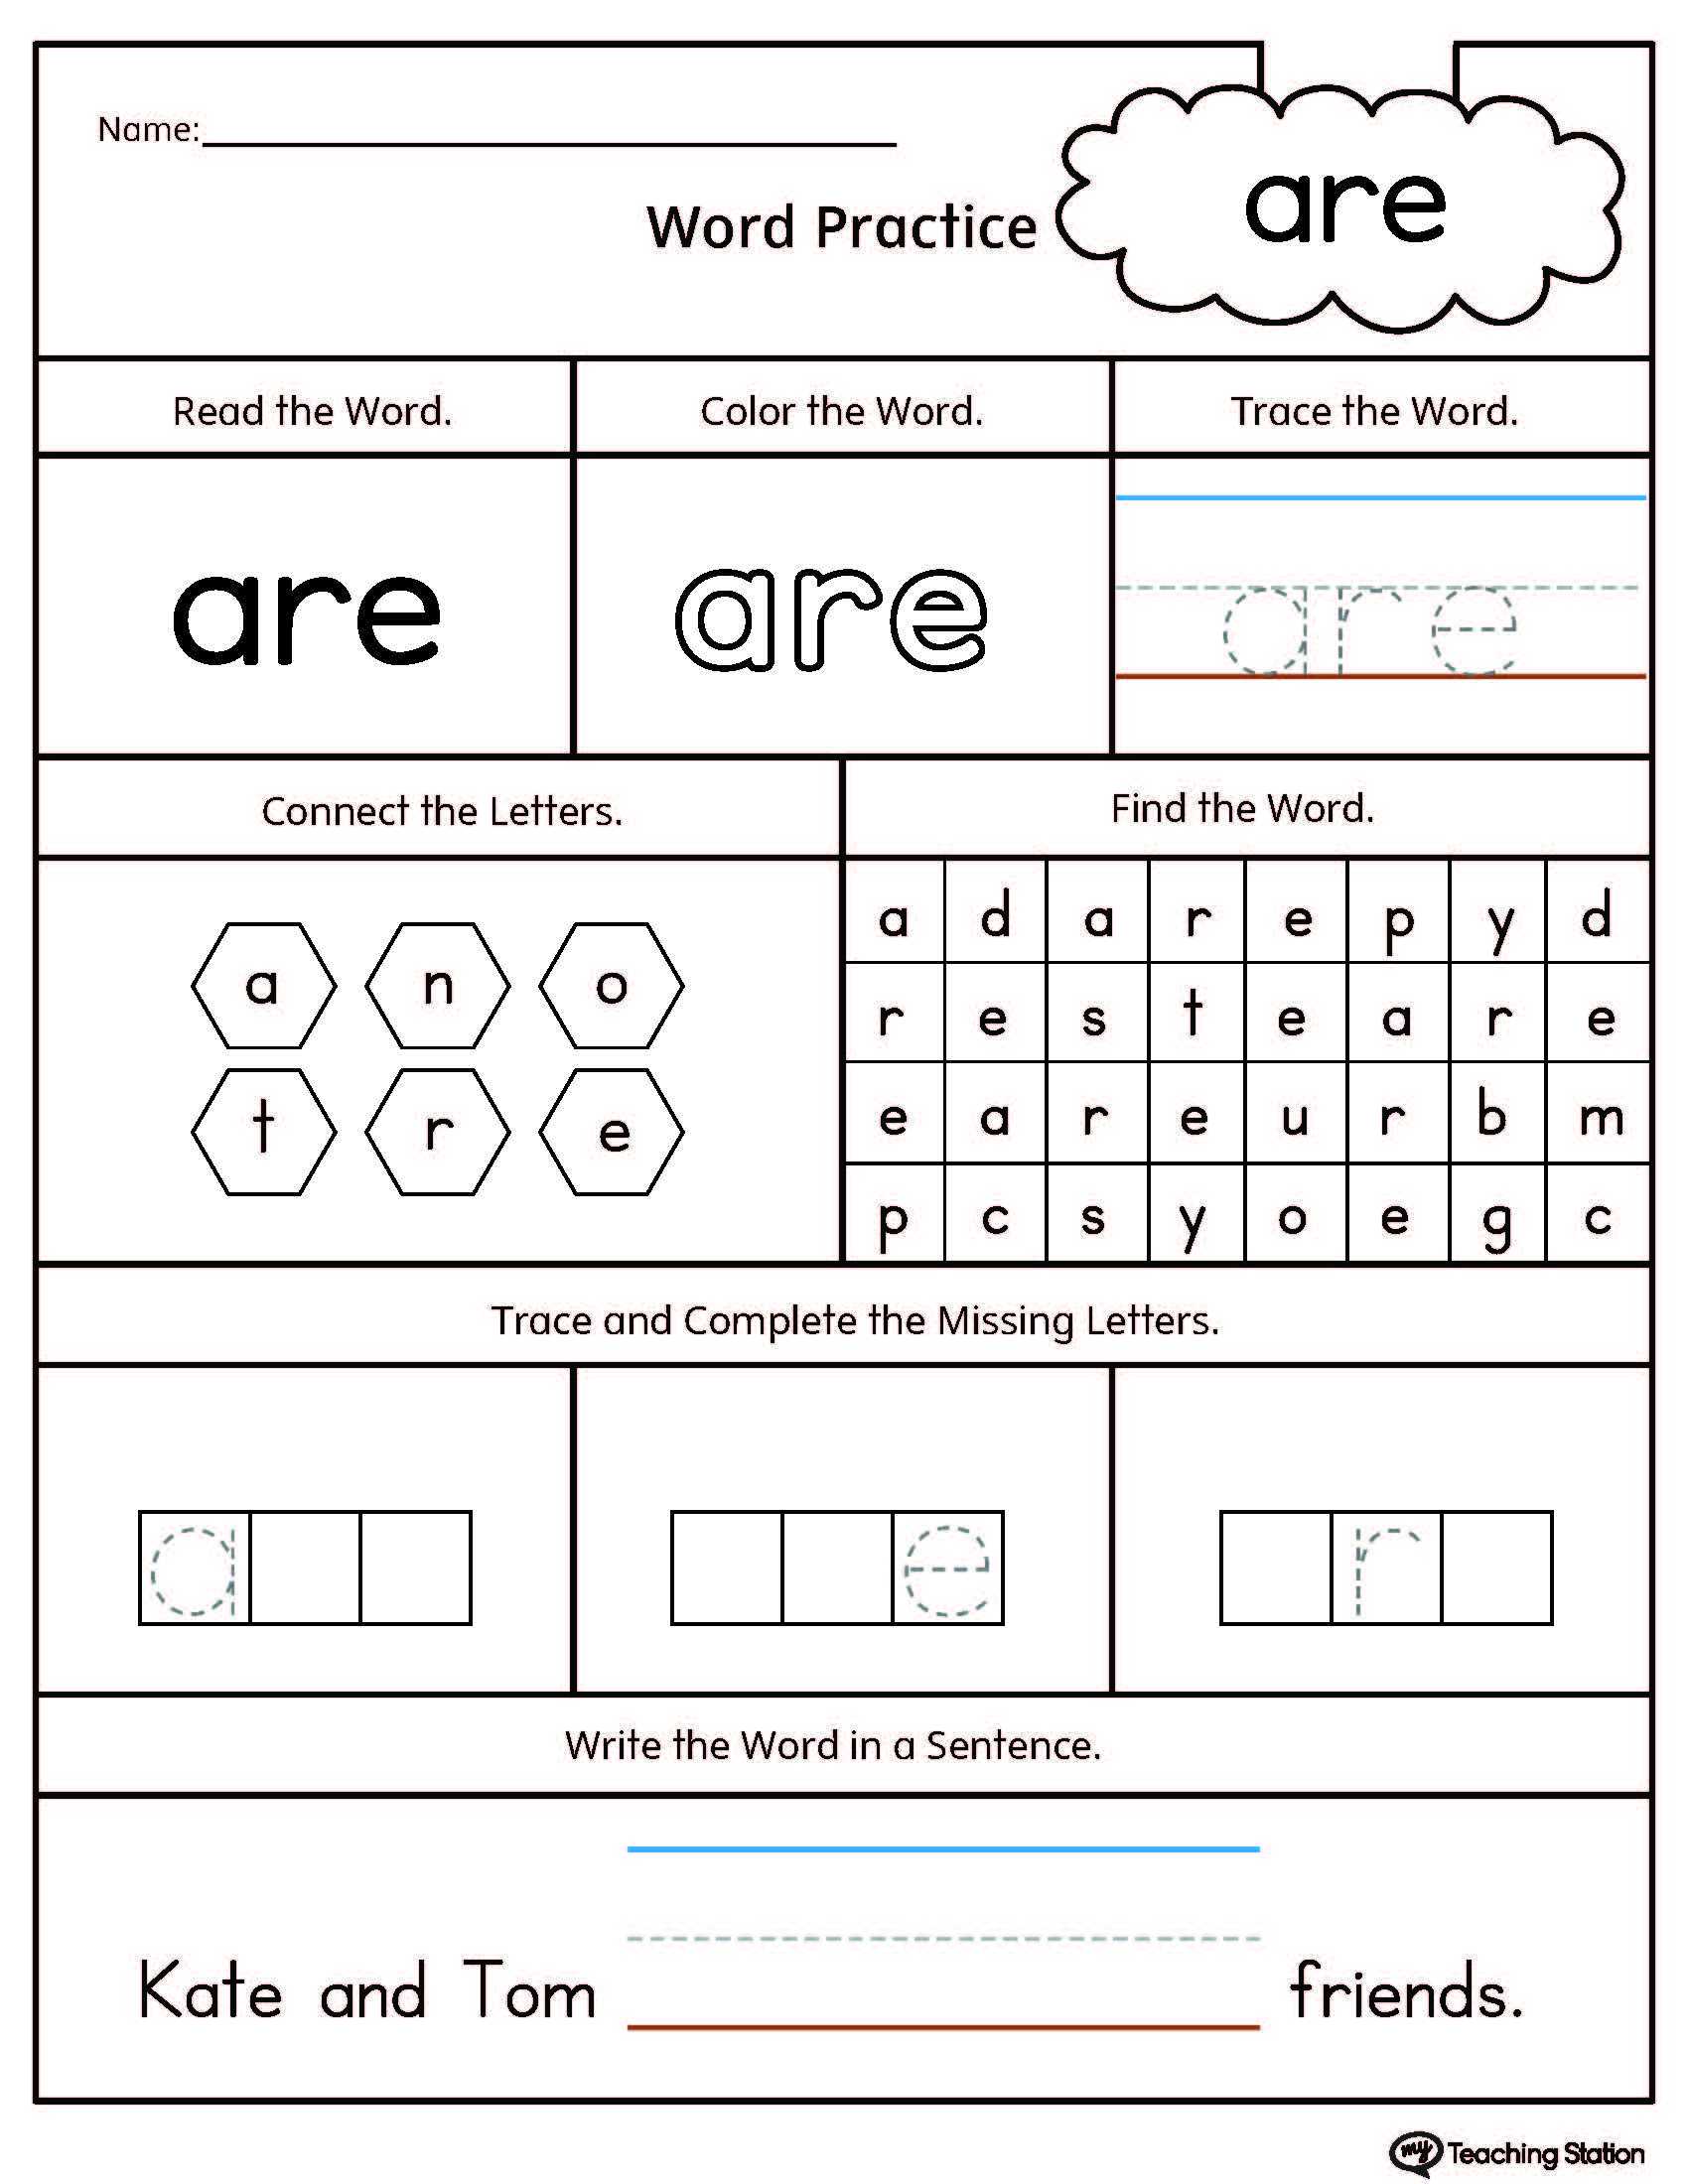 Preschool Writing Worksheets Free Printable Along with High Frequency Words Printable Worksheets